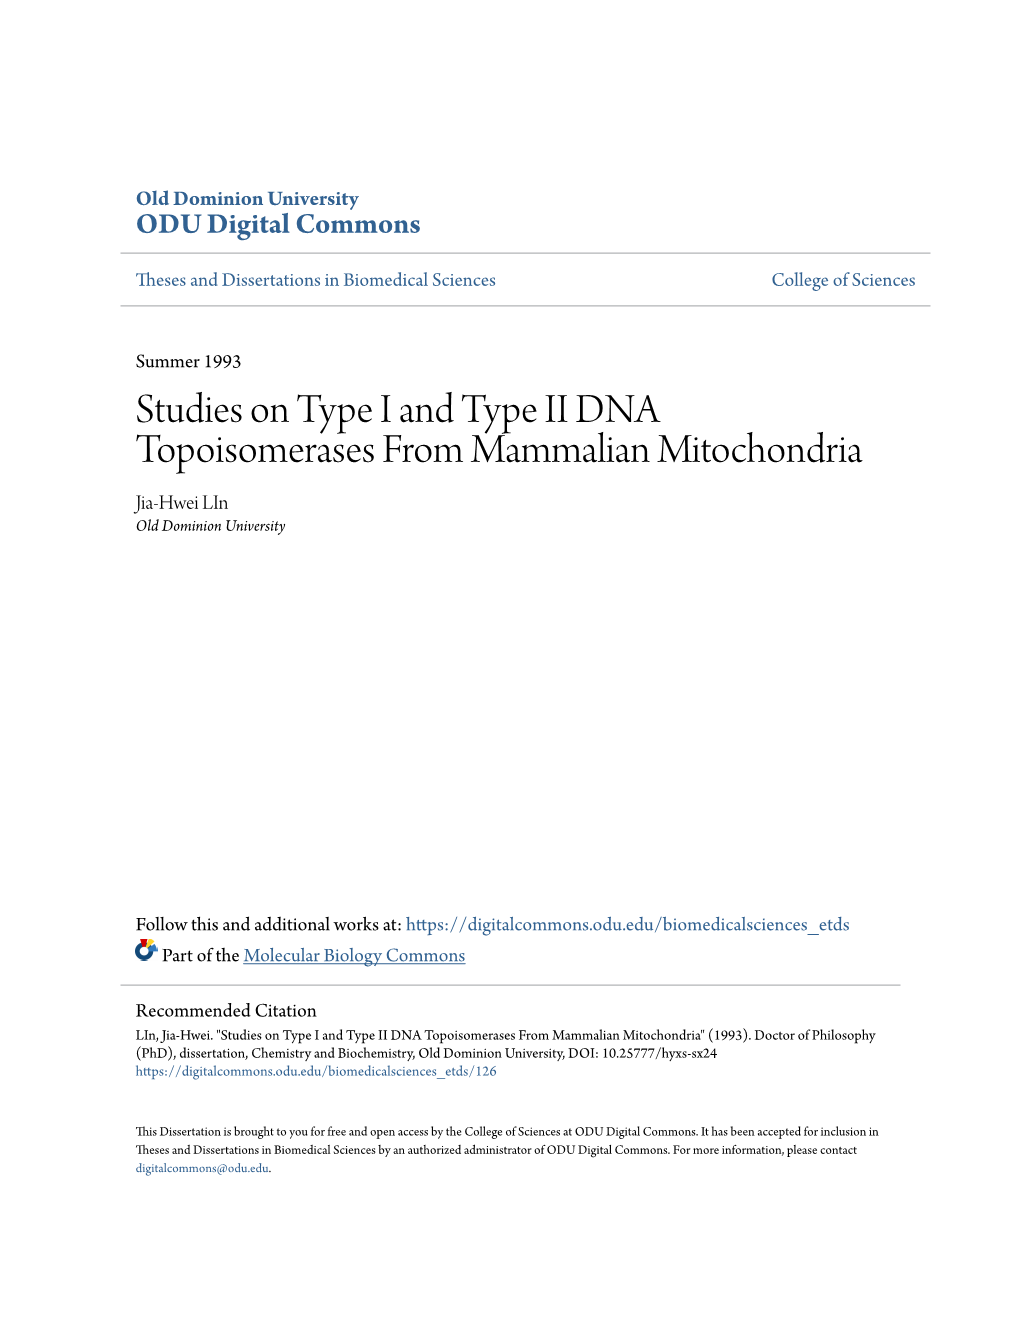 Studies on Type I and Type II DNA Topoisomerases from Mammalian Mitochondria Jia-Hwei Lin Old Dominion University